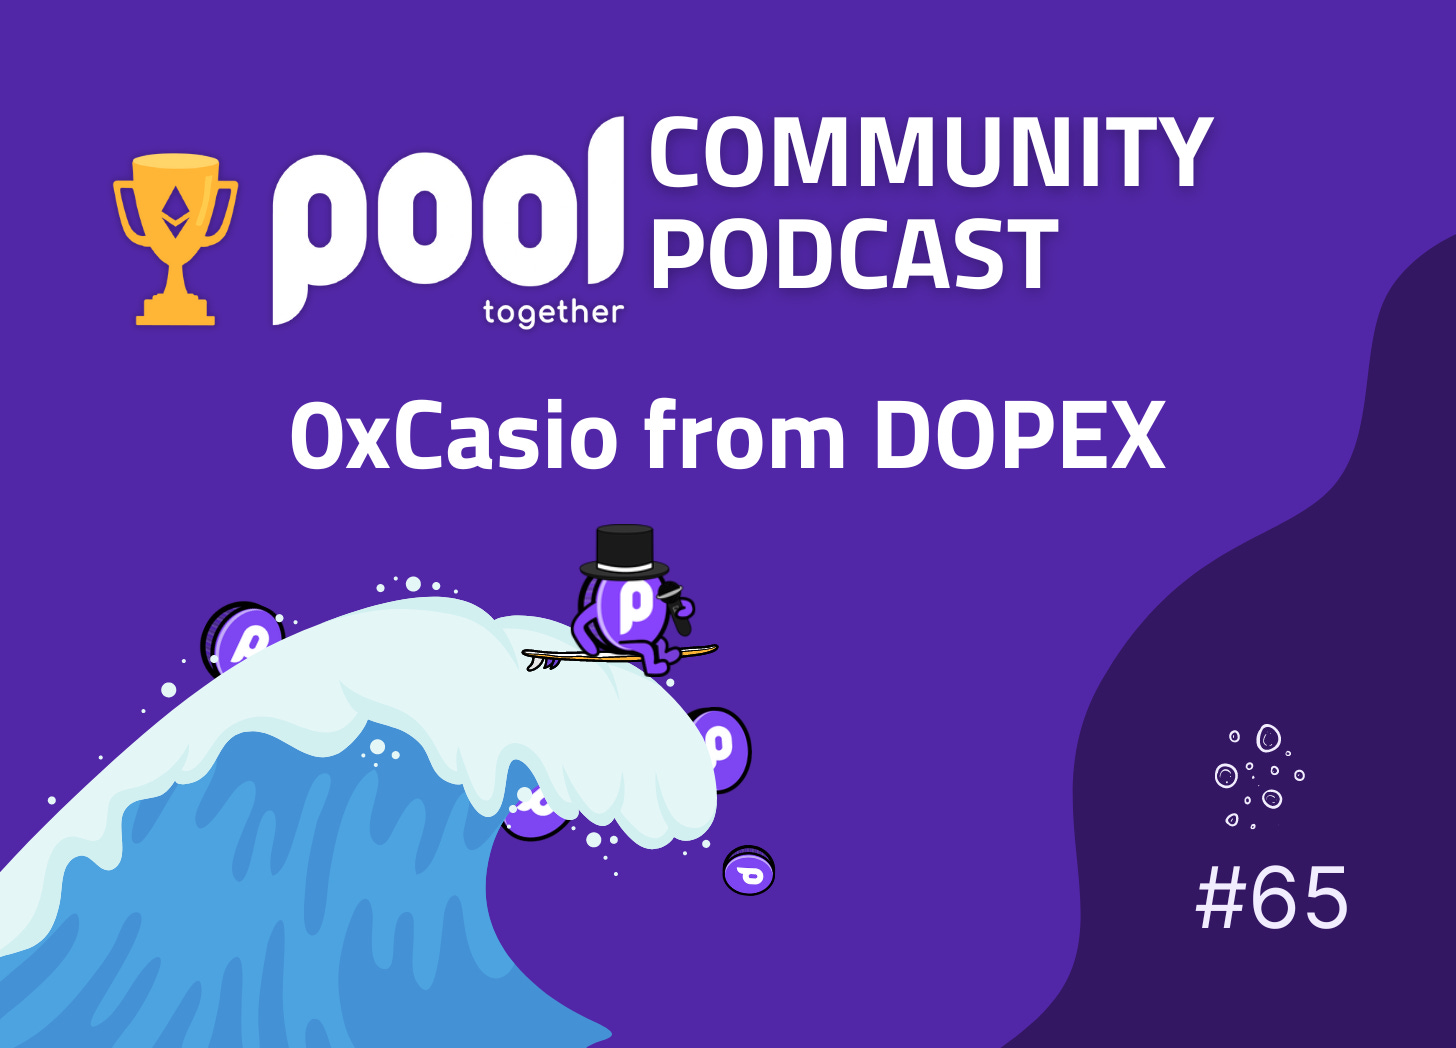 PoolTogether Community Podcast #66 with Dopex